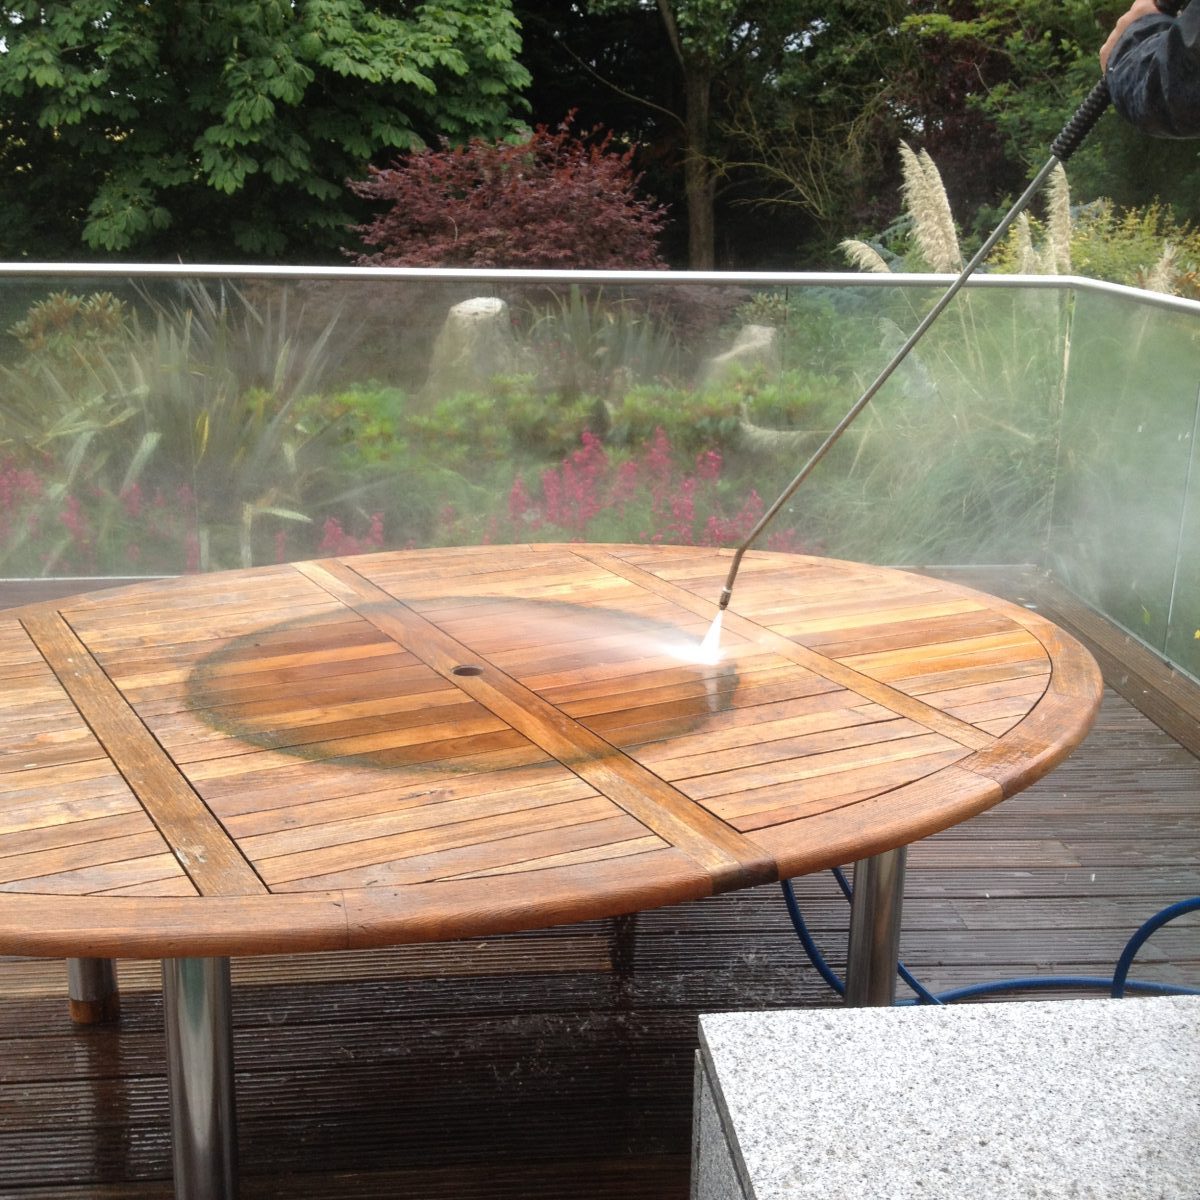 Power washing - Spruce up your Garden and Patio Furniture